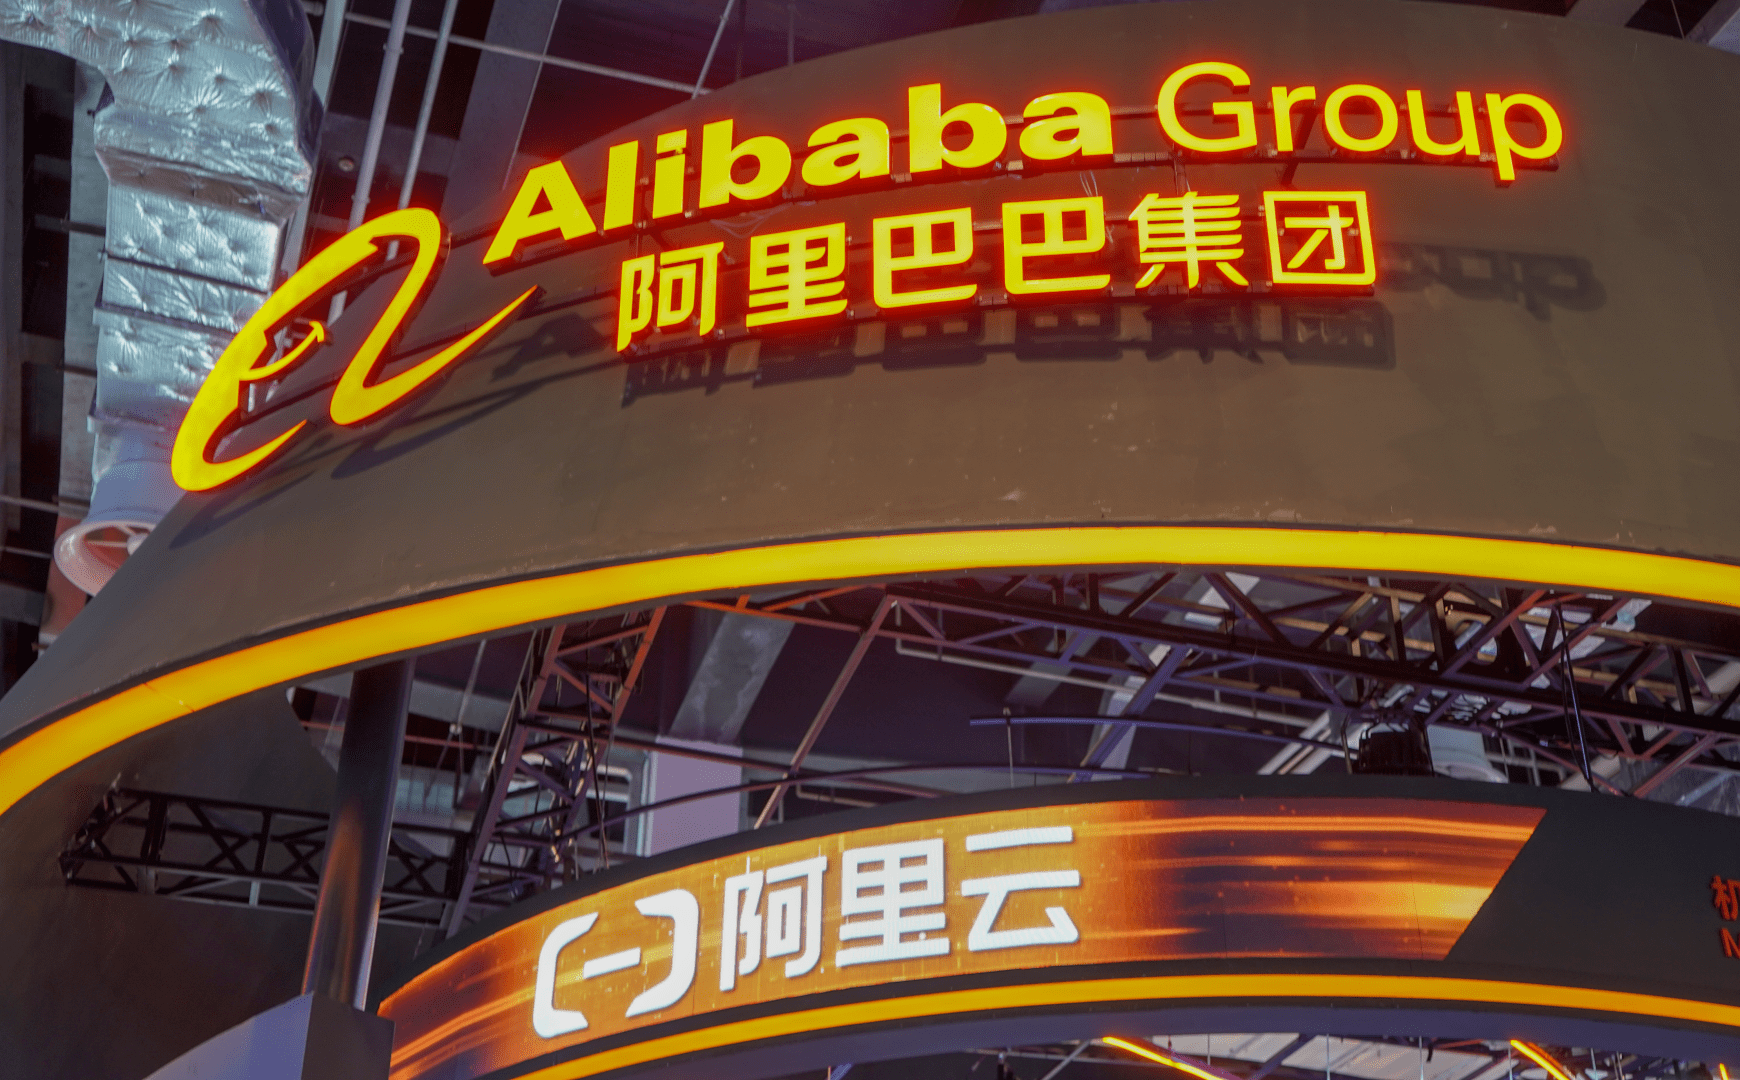 Alibaba joins peers in offering small business support · TechNode